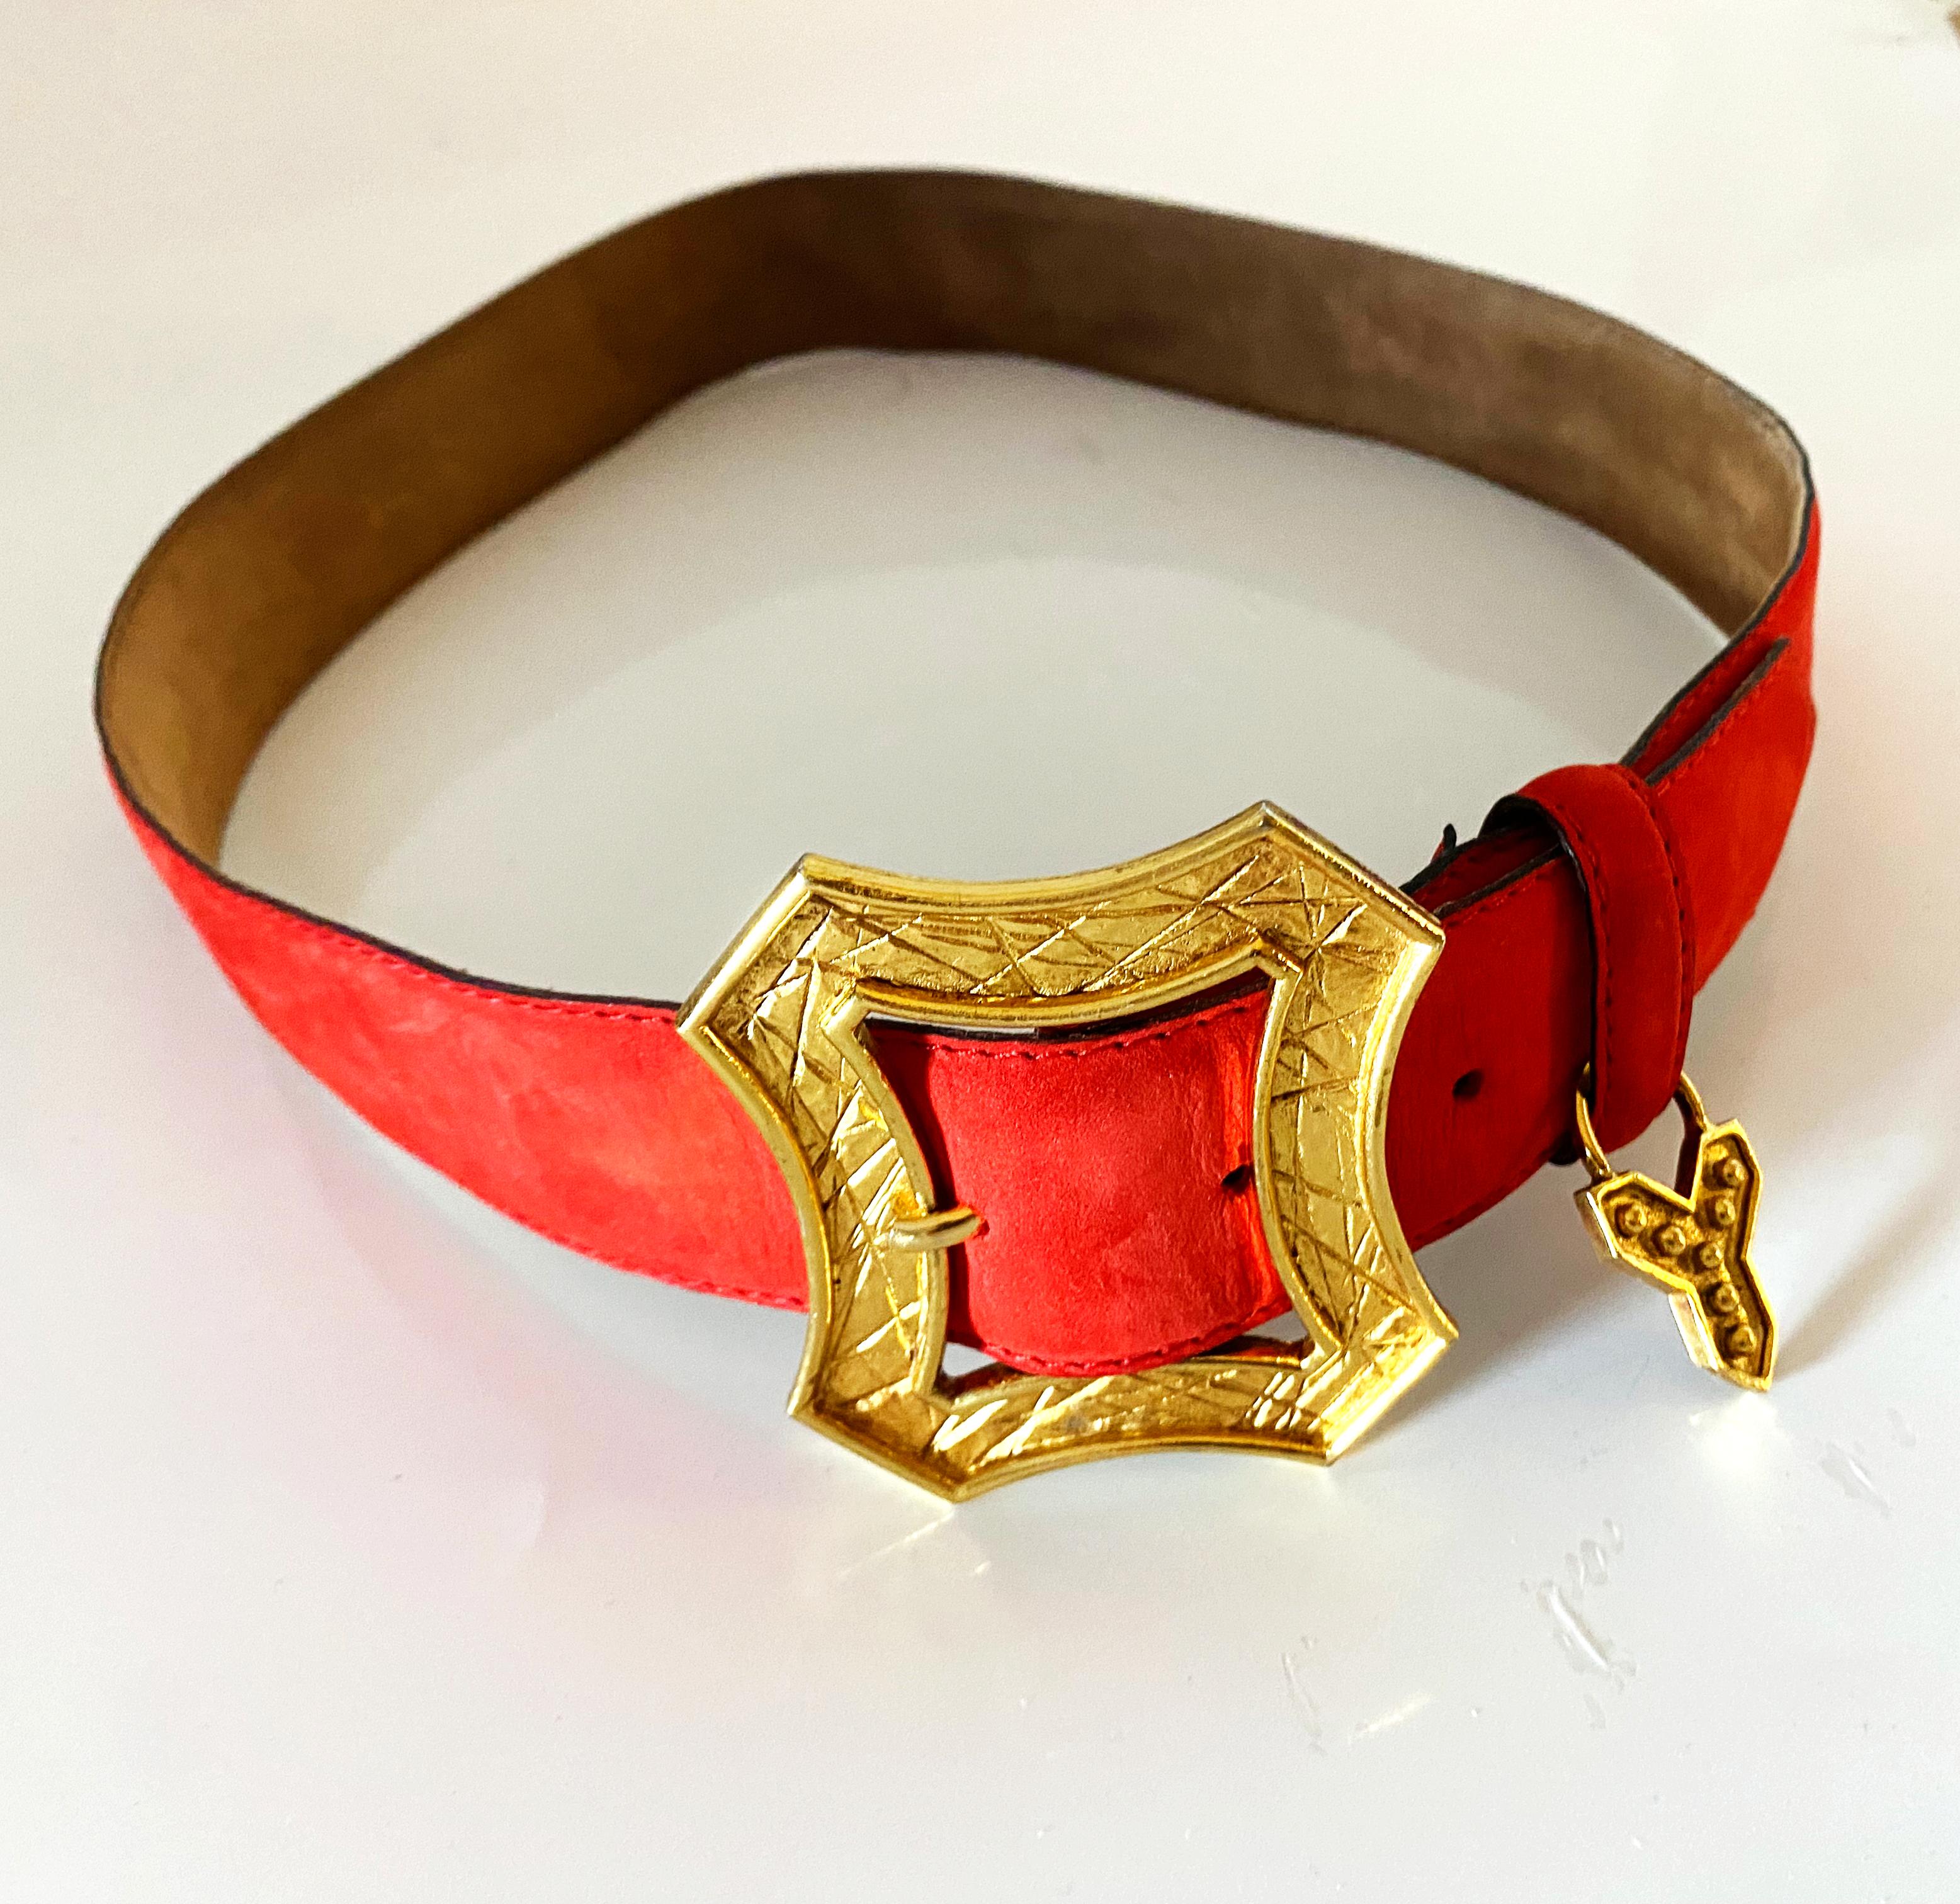 YSL's lobster-red suede leather belt is the perfect adornment for any ensemble, featuring a gold-tone metalware charm with the iconic Y initial, all crafted with luxurious precision in France.

Measurements: flat waist measurement 29-31